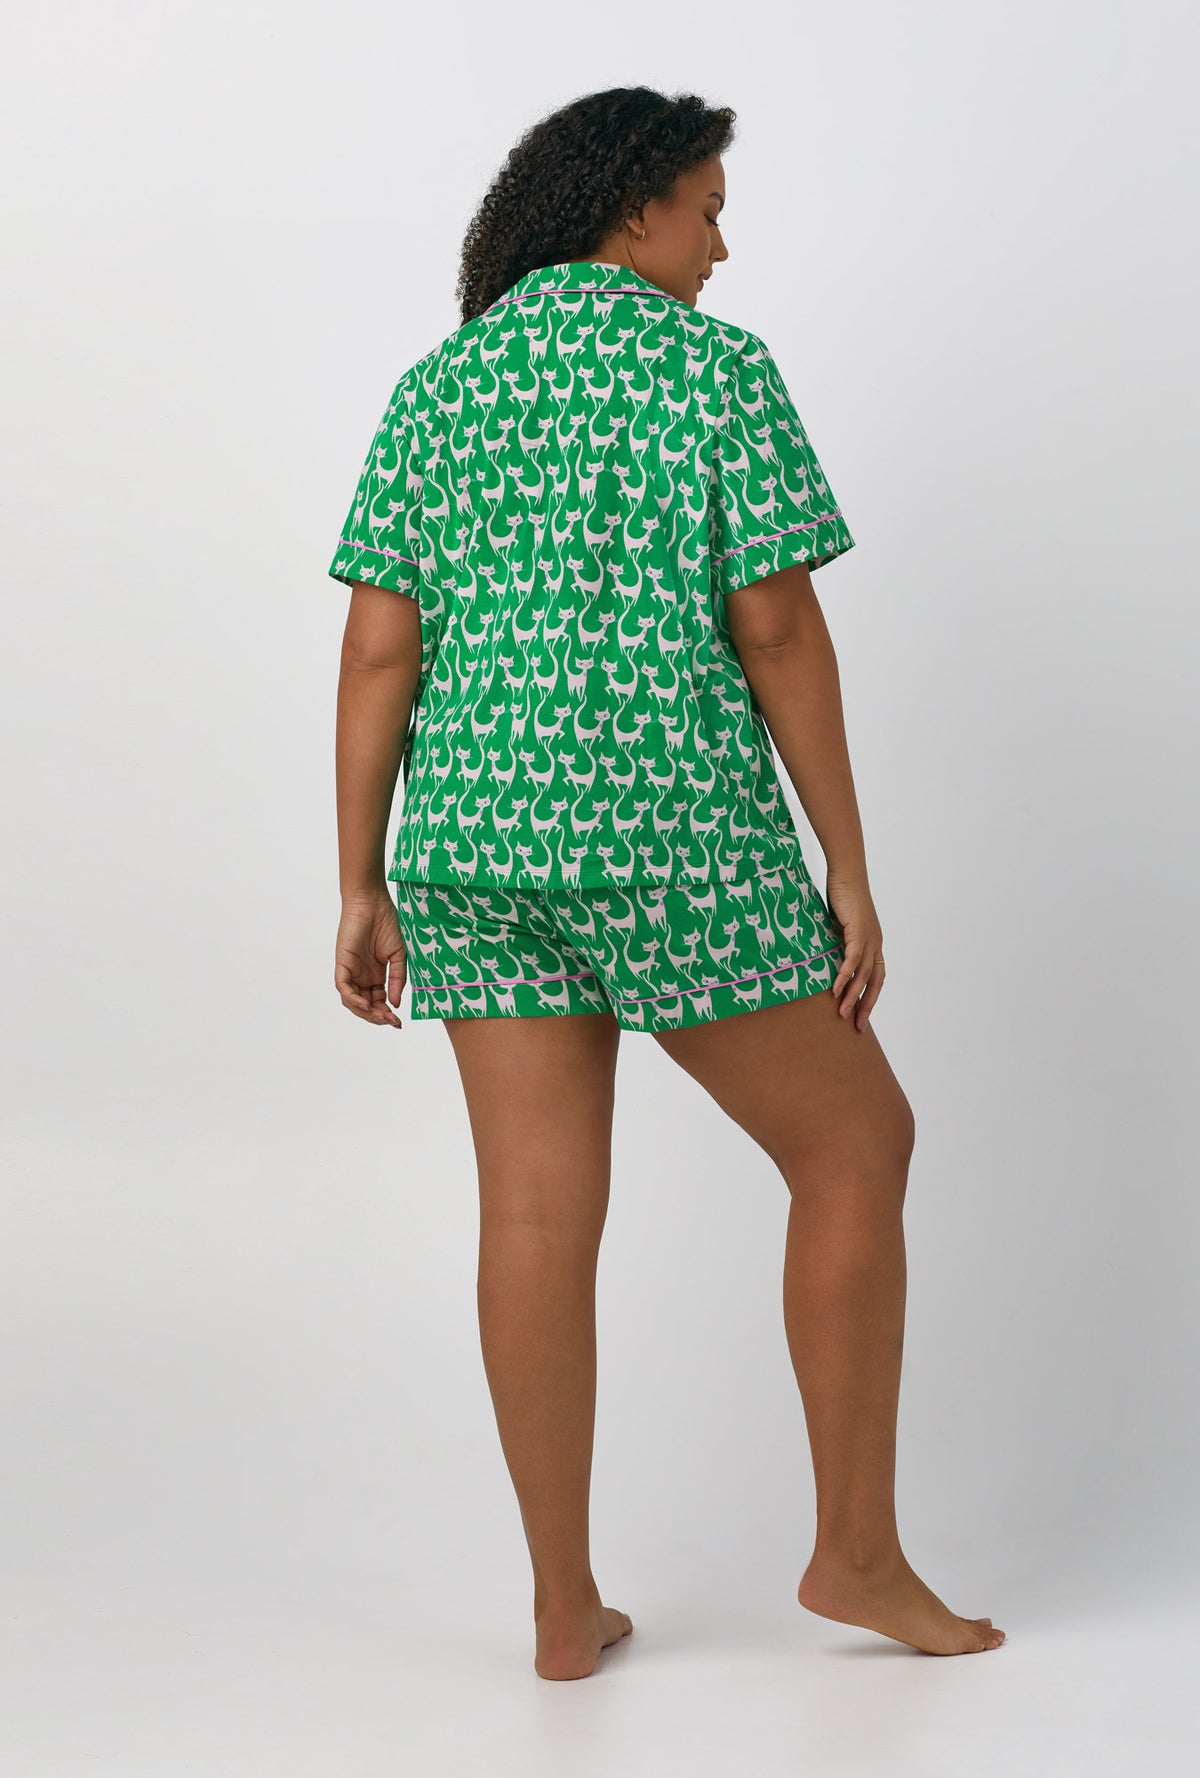 A lady wearing plus size green Short Sleeve Classic Shorty Stretch Jersey PJ Set with Cool Cats print